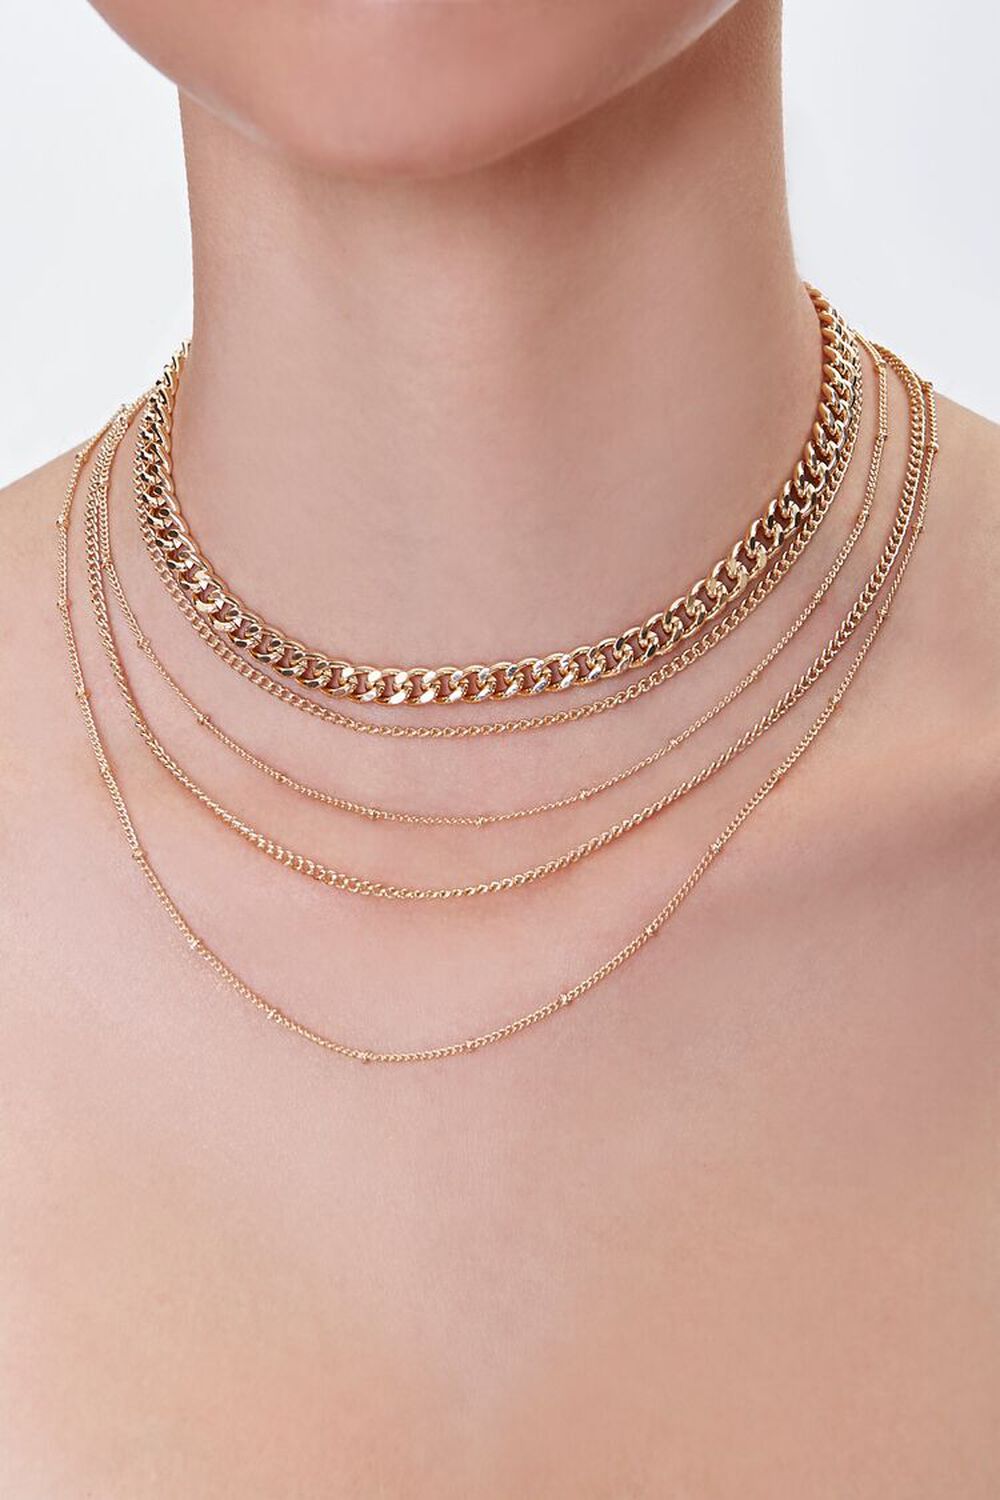 GOLD Curb Chain Layered Necklace, image 1